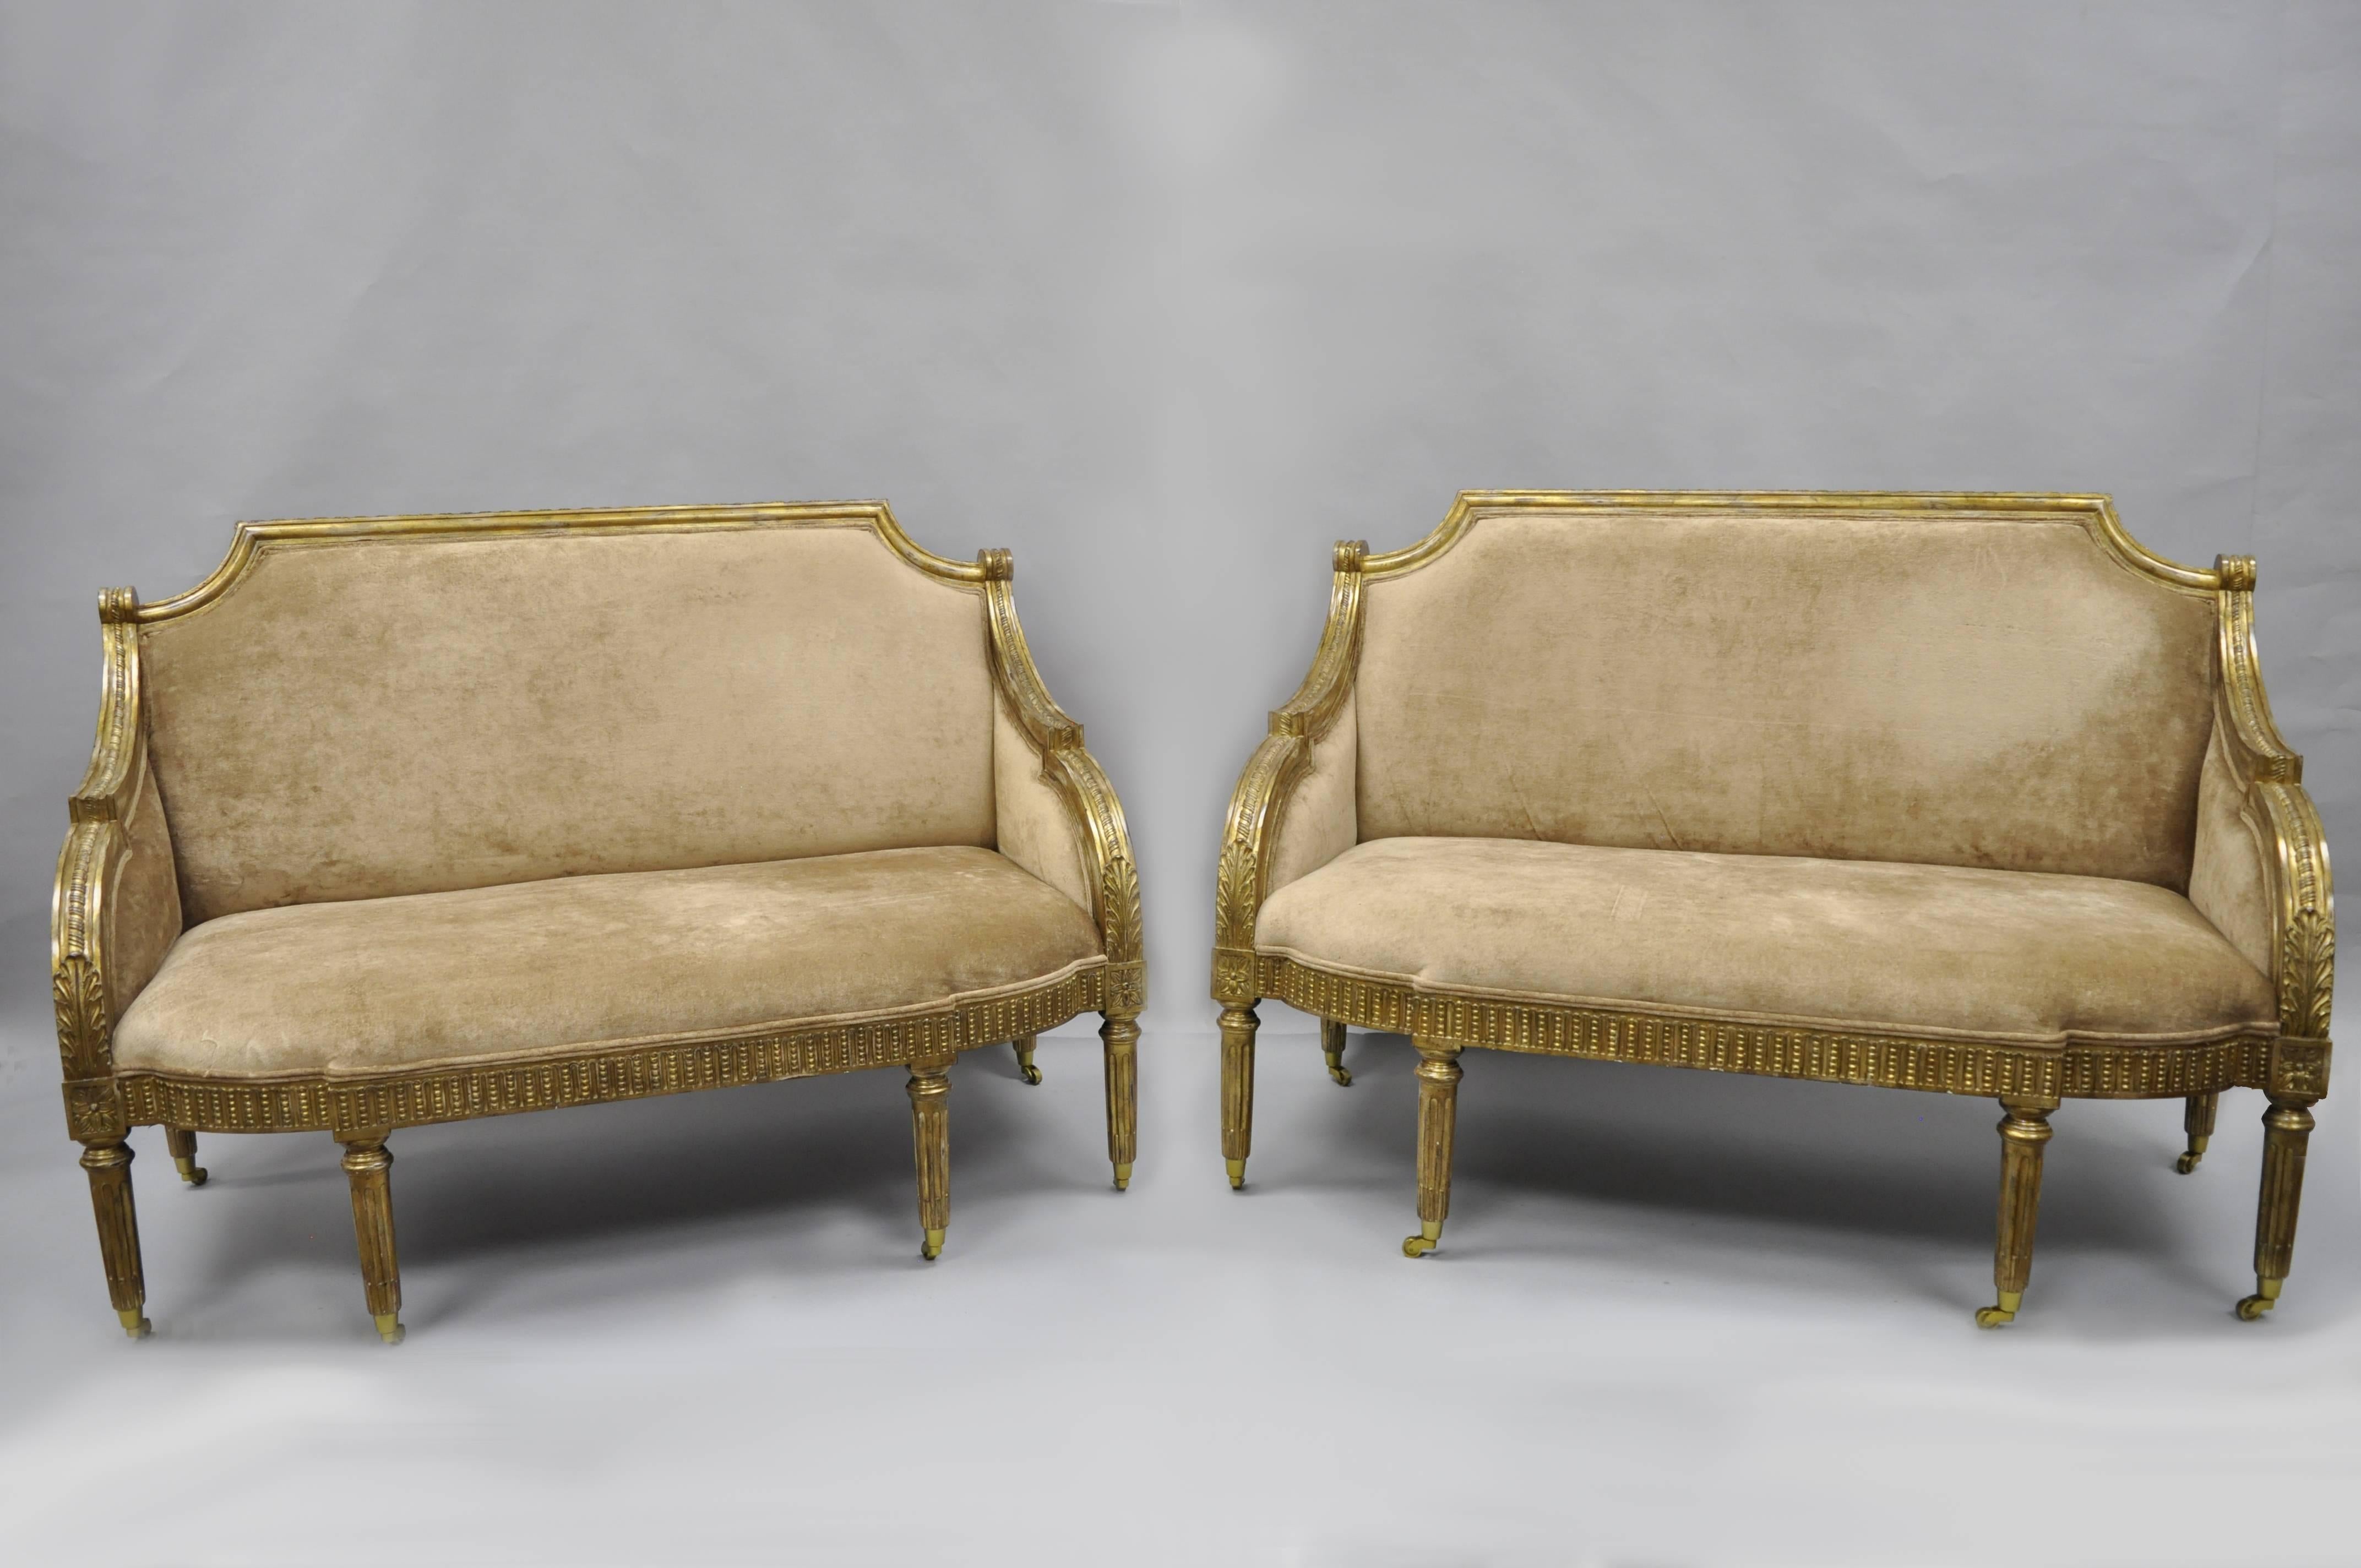 Pair of Maitland-Smith French Empire/neoclassical style gold loveseats. The pair features shapely carved wood frames, antiqued / distressed gold finish, six reeded and tapered legs on brass rolling casters and original Maitland-Smith brass plaque